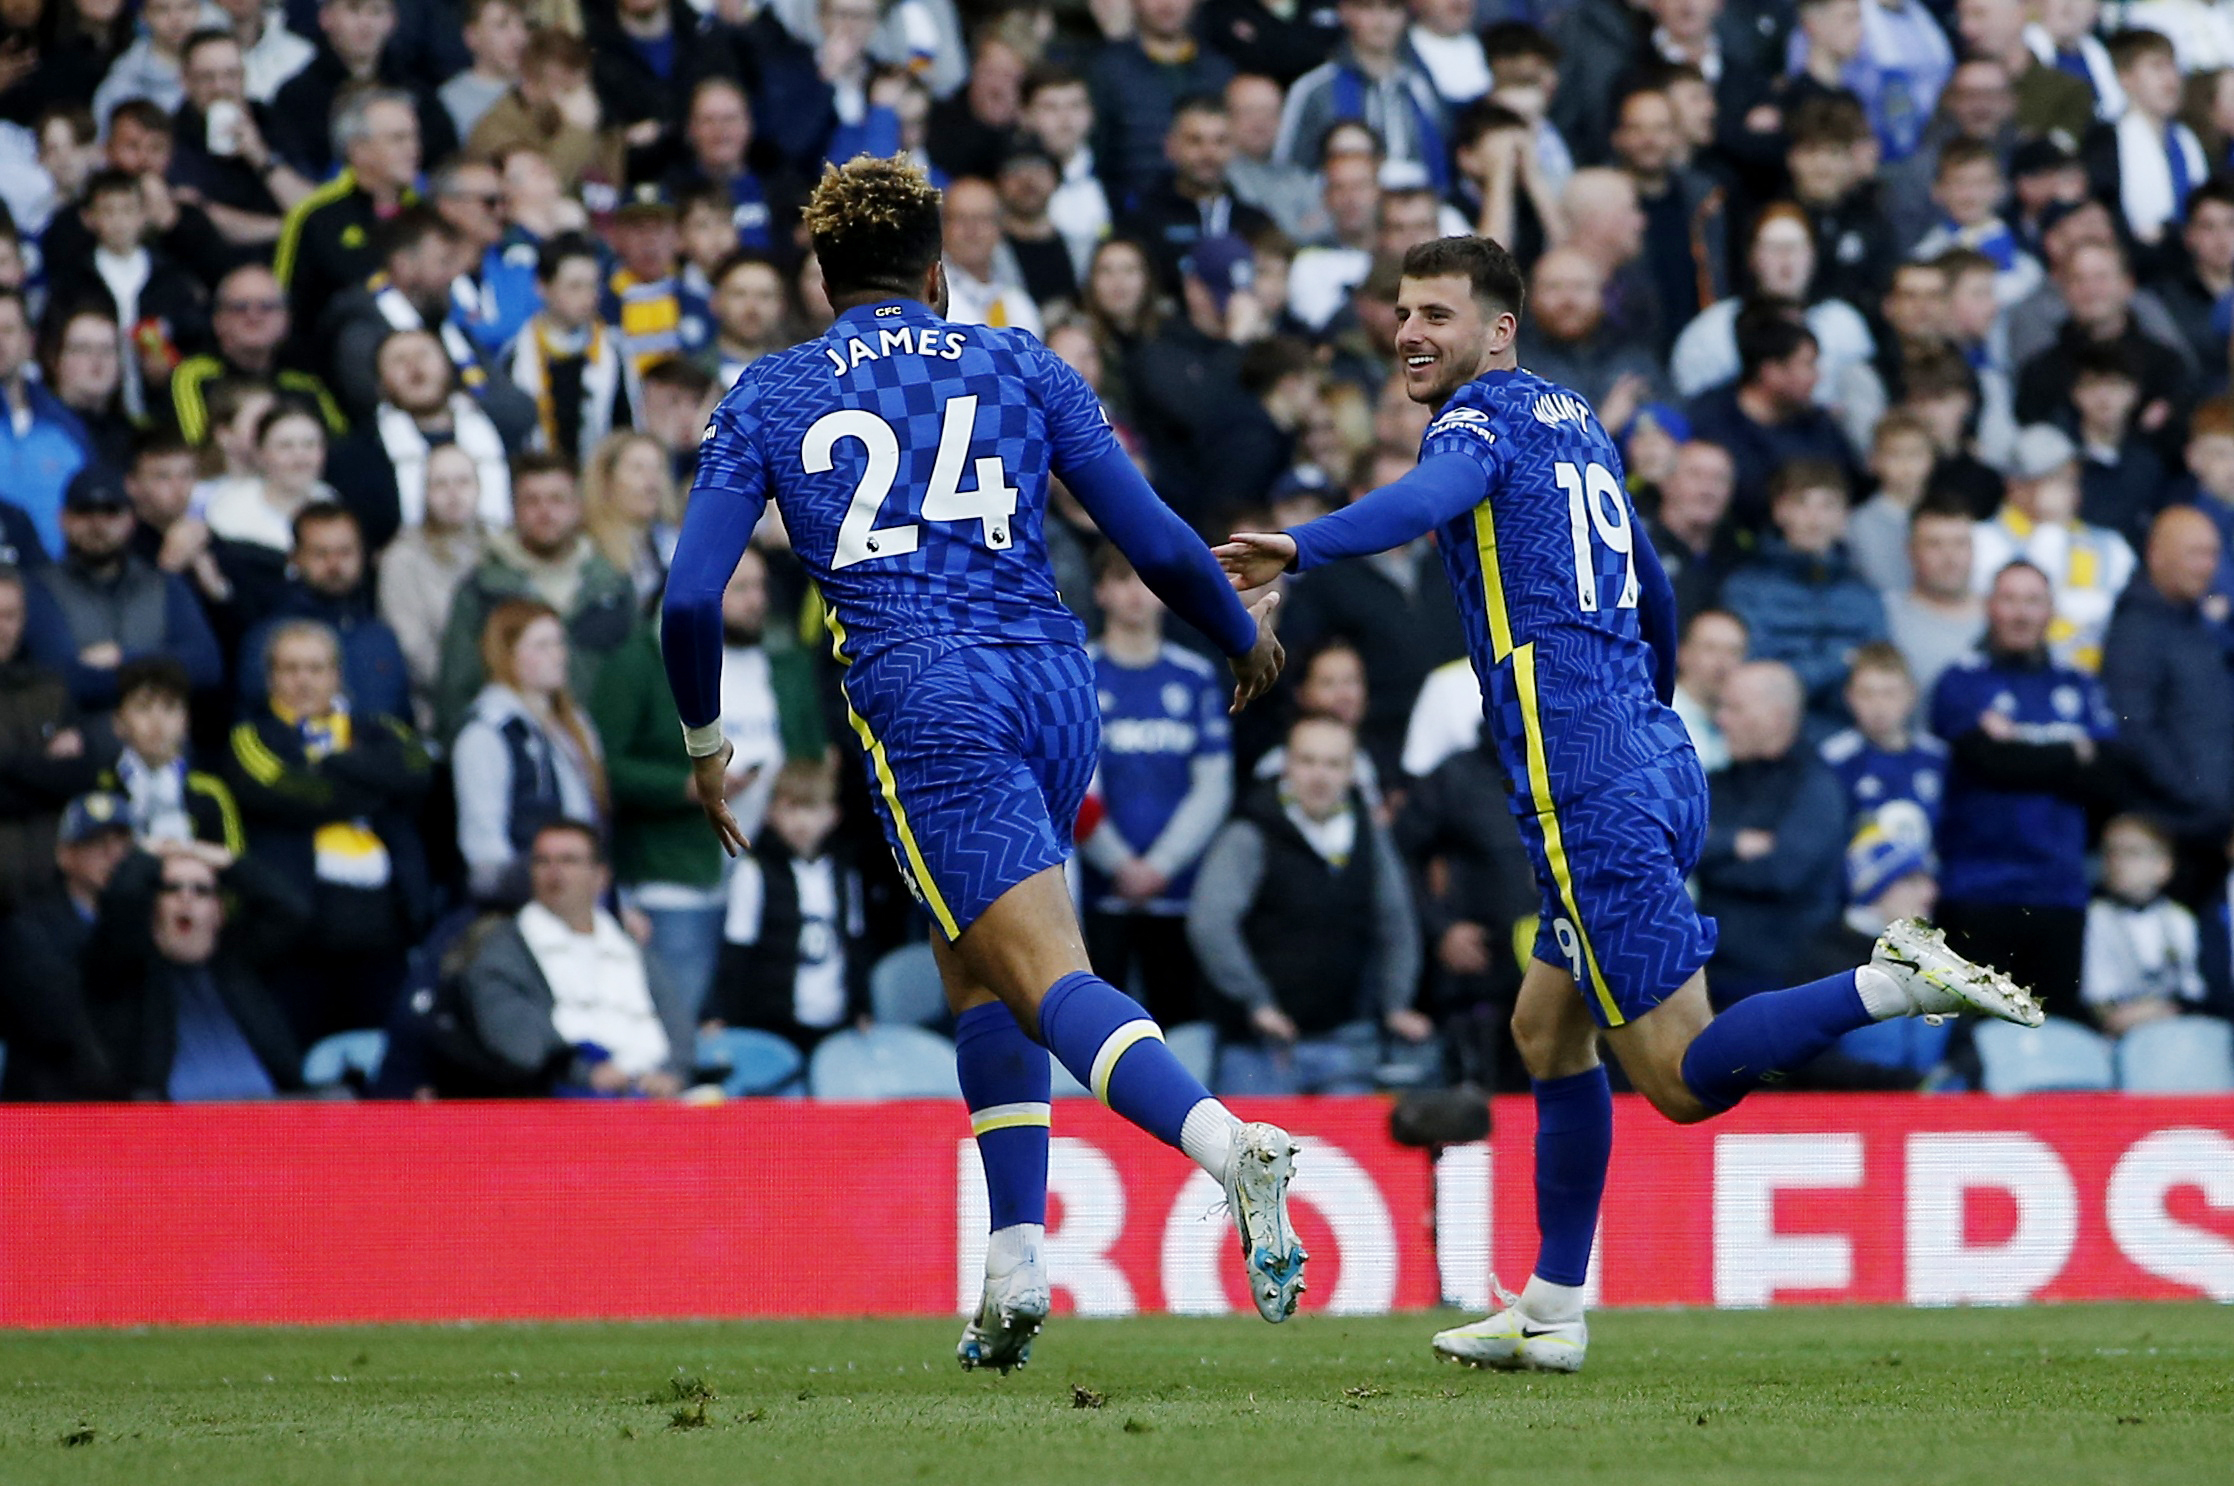 Premier League: Chelsea beat 10-men Leeds United in a 3-0 riot at Elland Road: Lukaku, Mount and Pulisic amongst the goals, Watch Chelsea beat Leeds HIGHLIGHTS